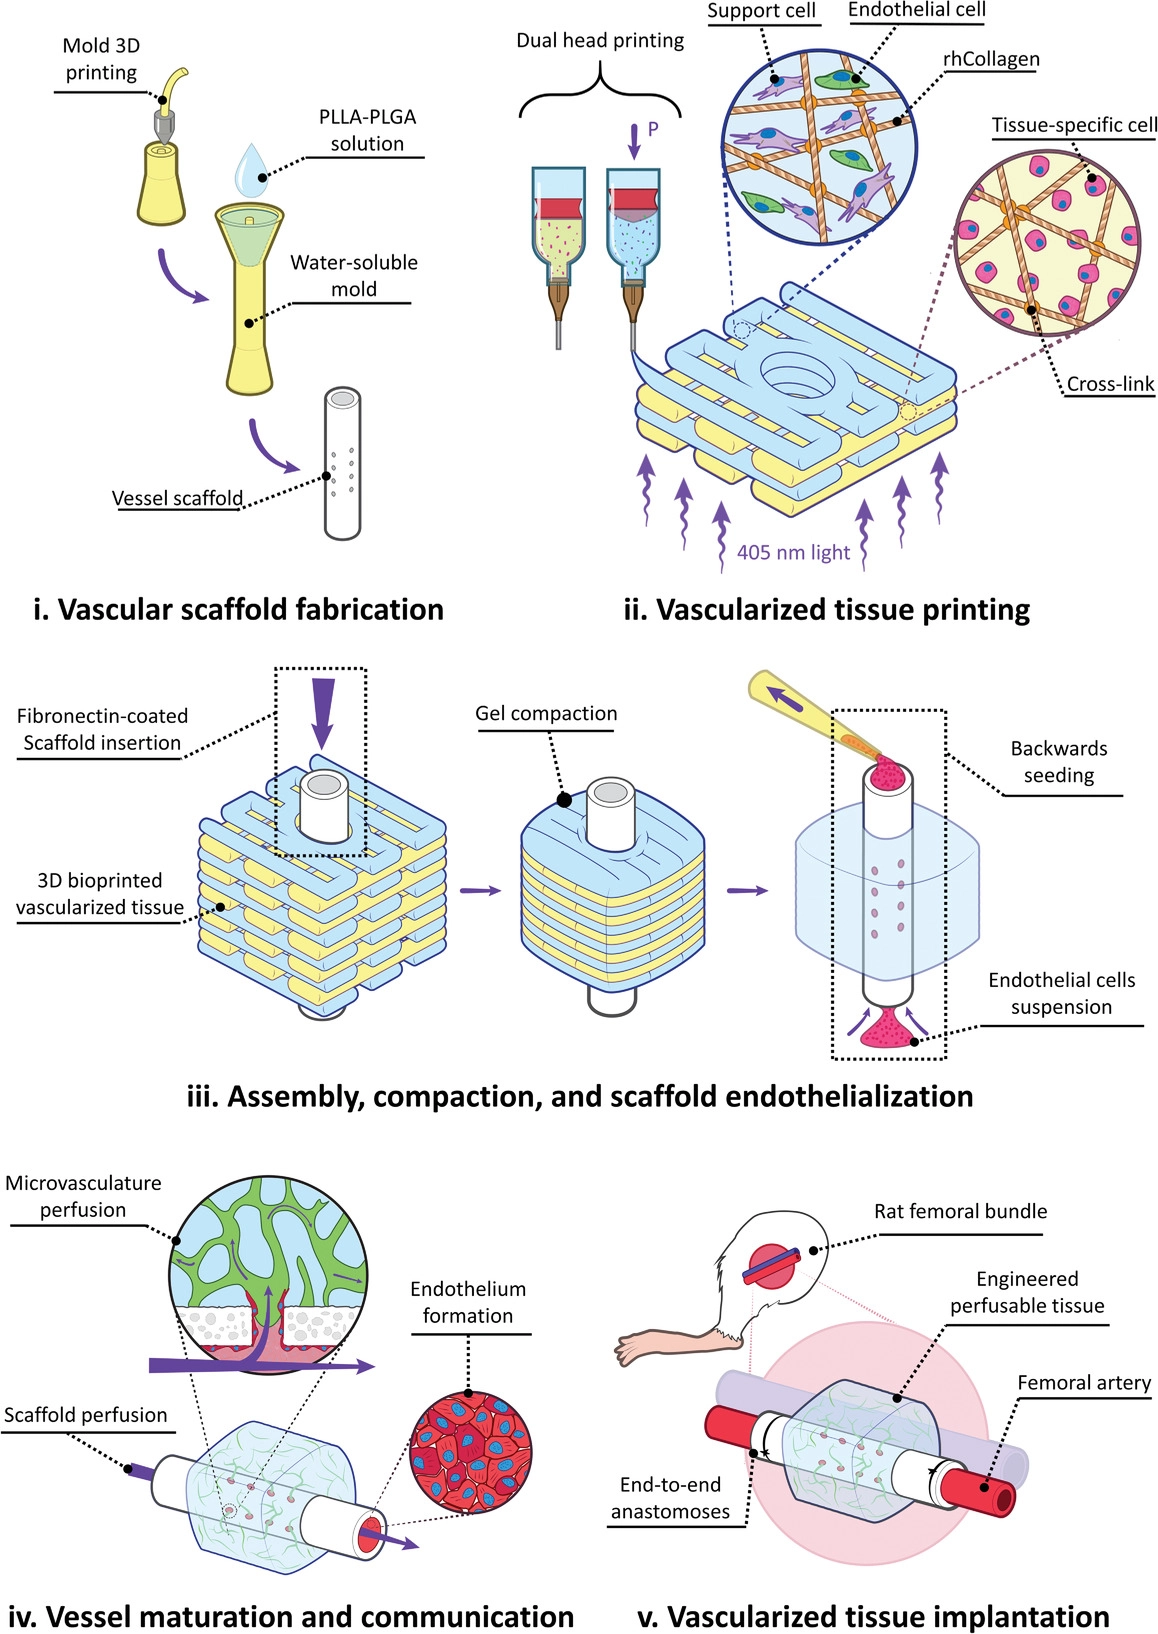 Fabricating and implanting perfusable vascularized tissues. Image via Advanced Materials.